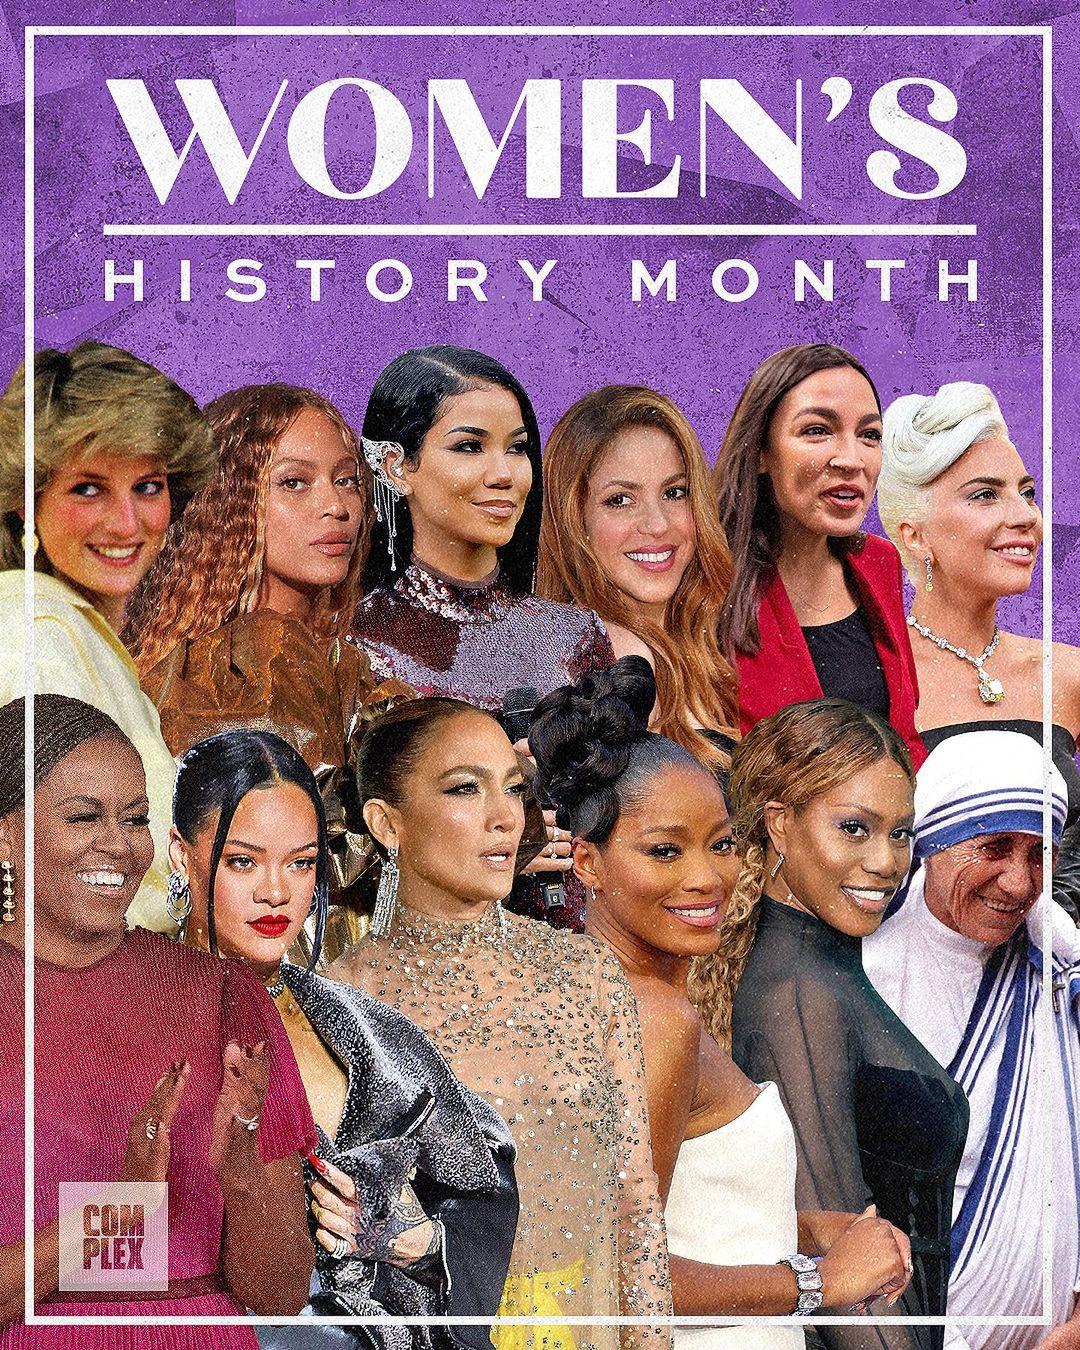 class="content__text"
 Celebrating #WomensHistoryMonth all of March 🫶🏿🫶🏽🫶 ✨ Tag the lady love of your life. 
 